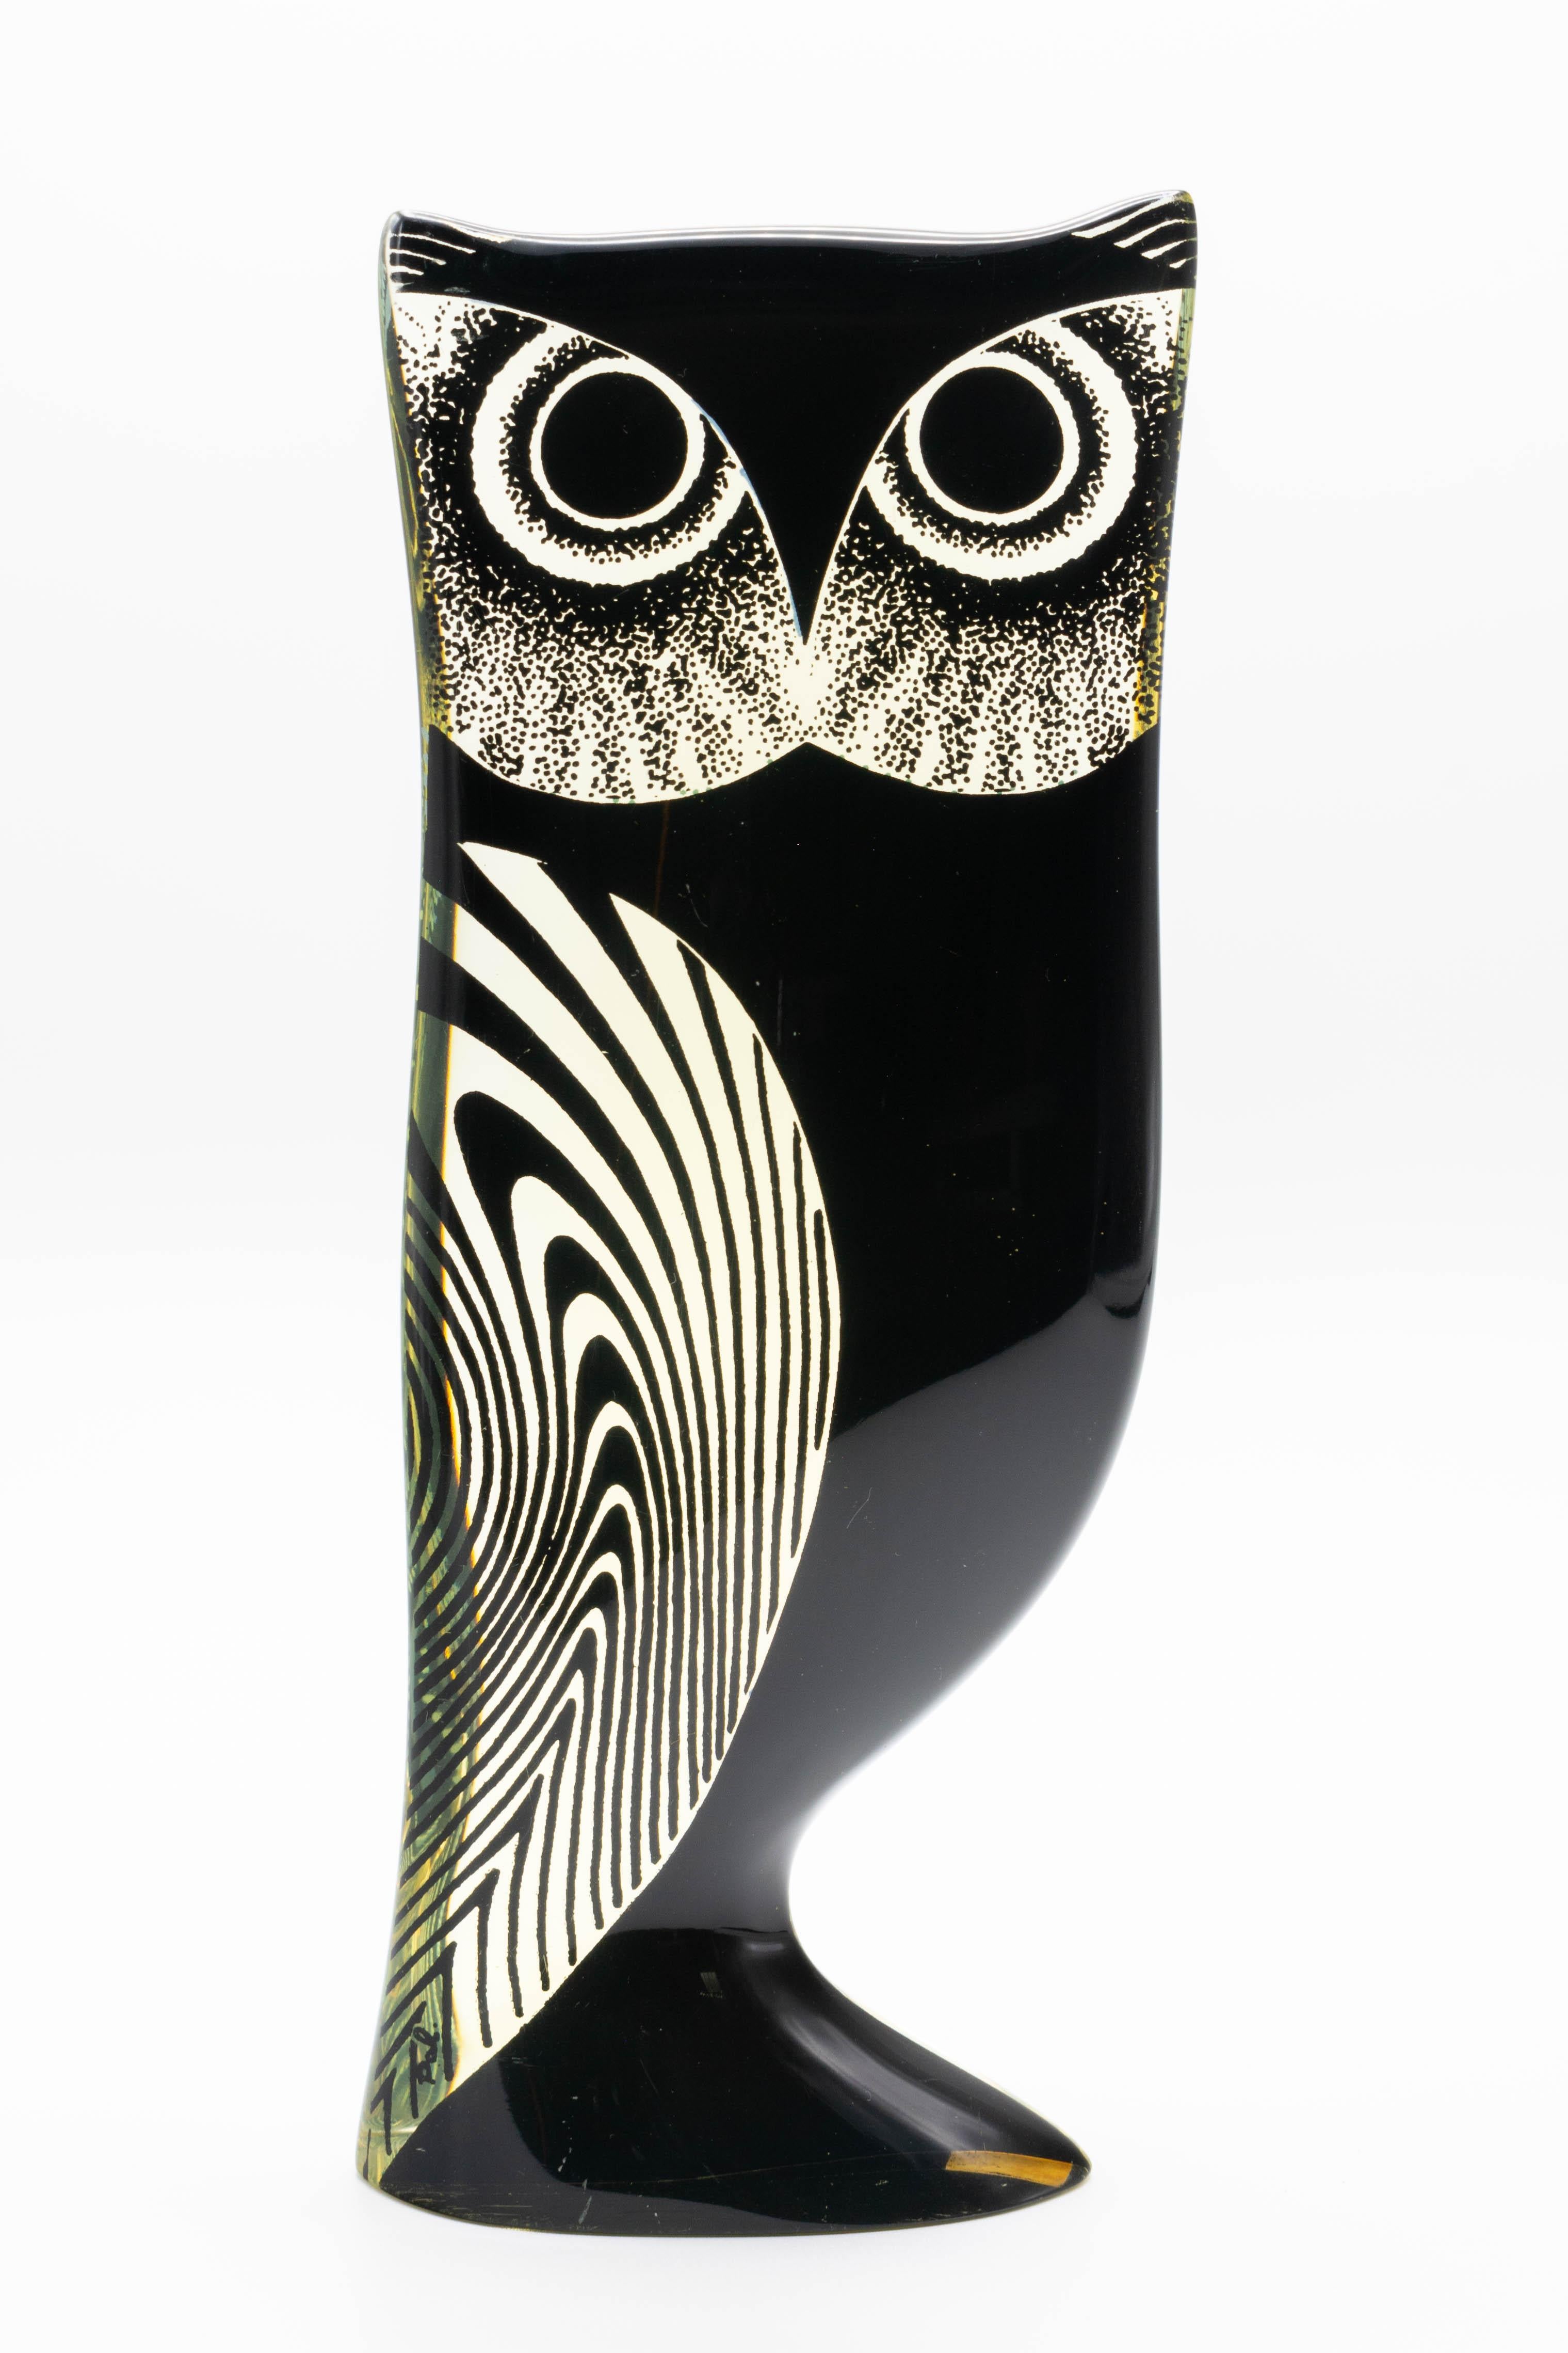 A Mid-Century Modern Lucite Op Art blue and black owl designed by Abraham Palatnik. Original label on bottom: Made in Brasil. Abraham Palatnik (born in 1928) is a Brazilian artist and inventor whose innovations include kinechromatic art. Part of the